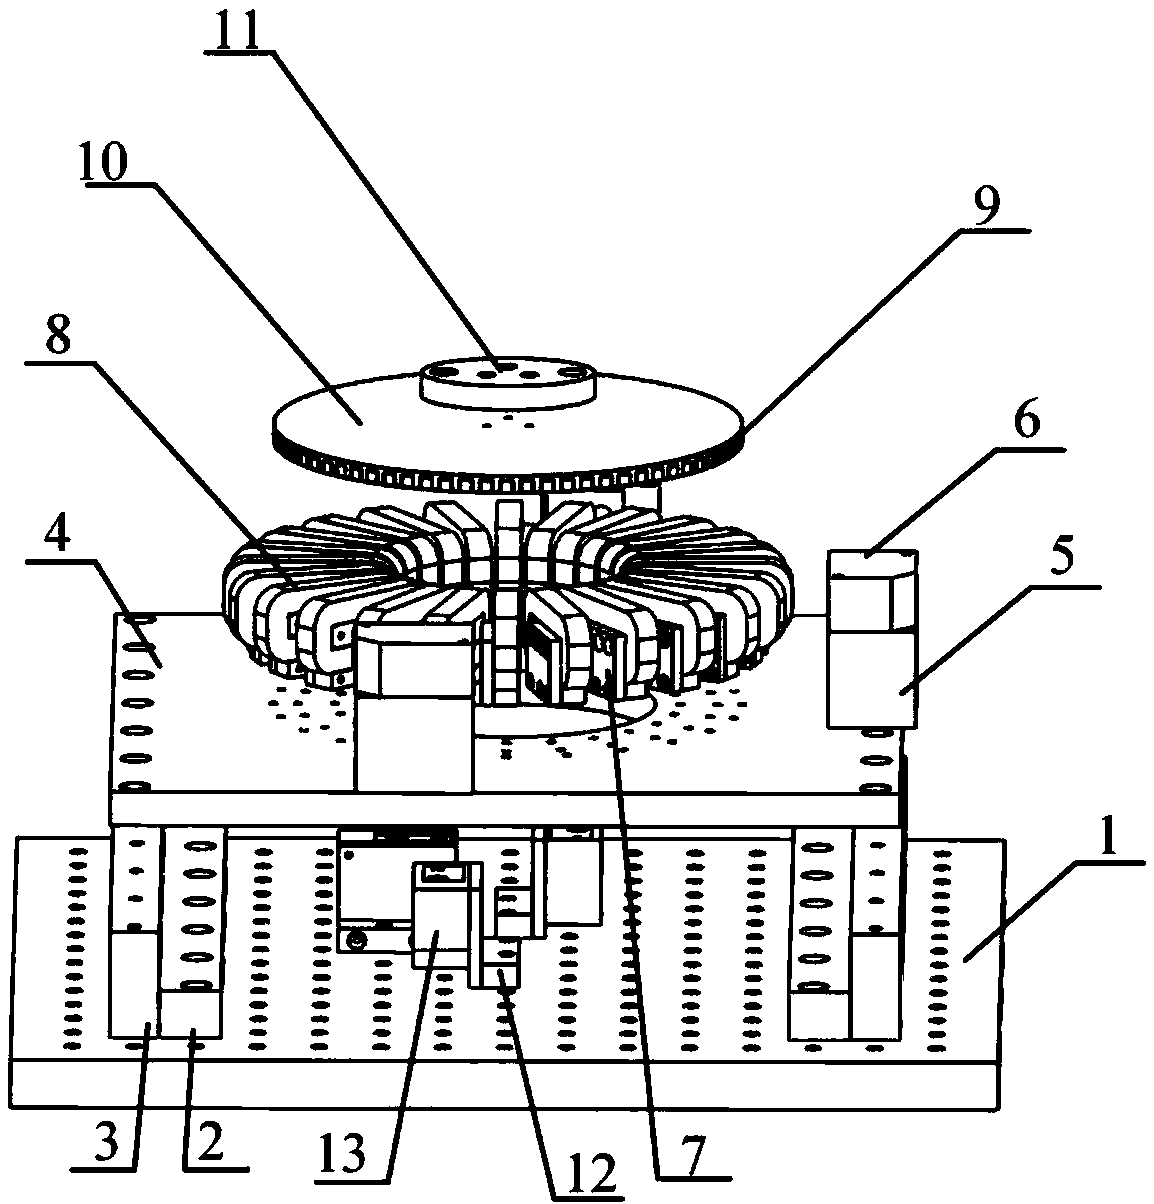 Six-degree-of-freedom magnetic suspension rotary table and control system and method